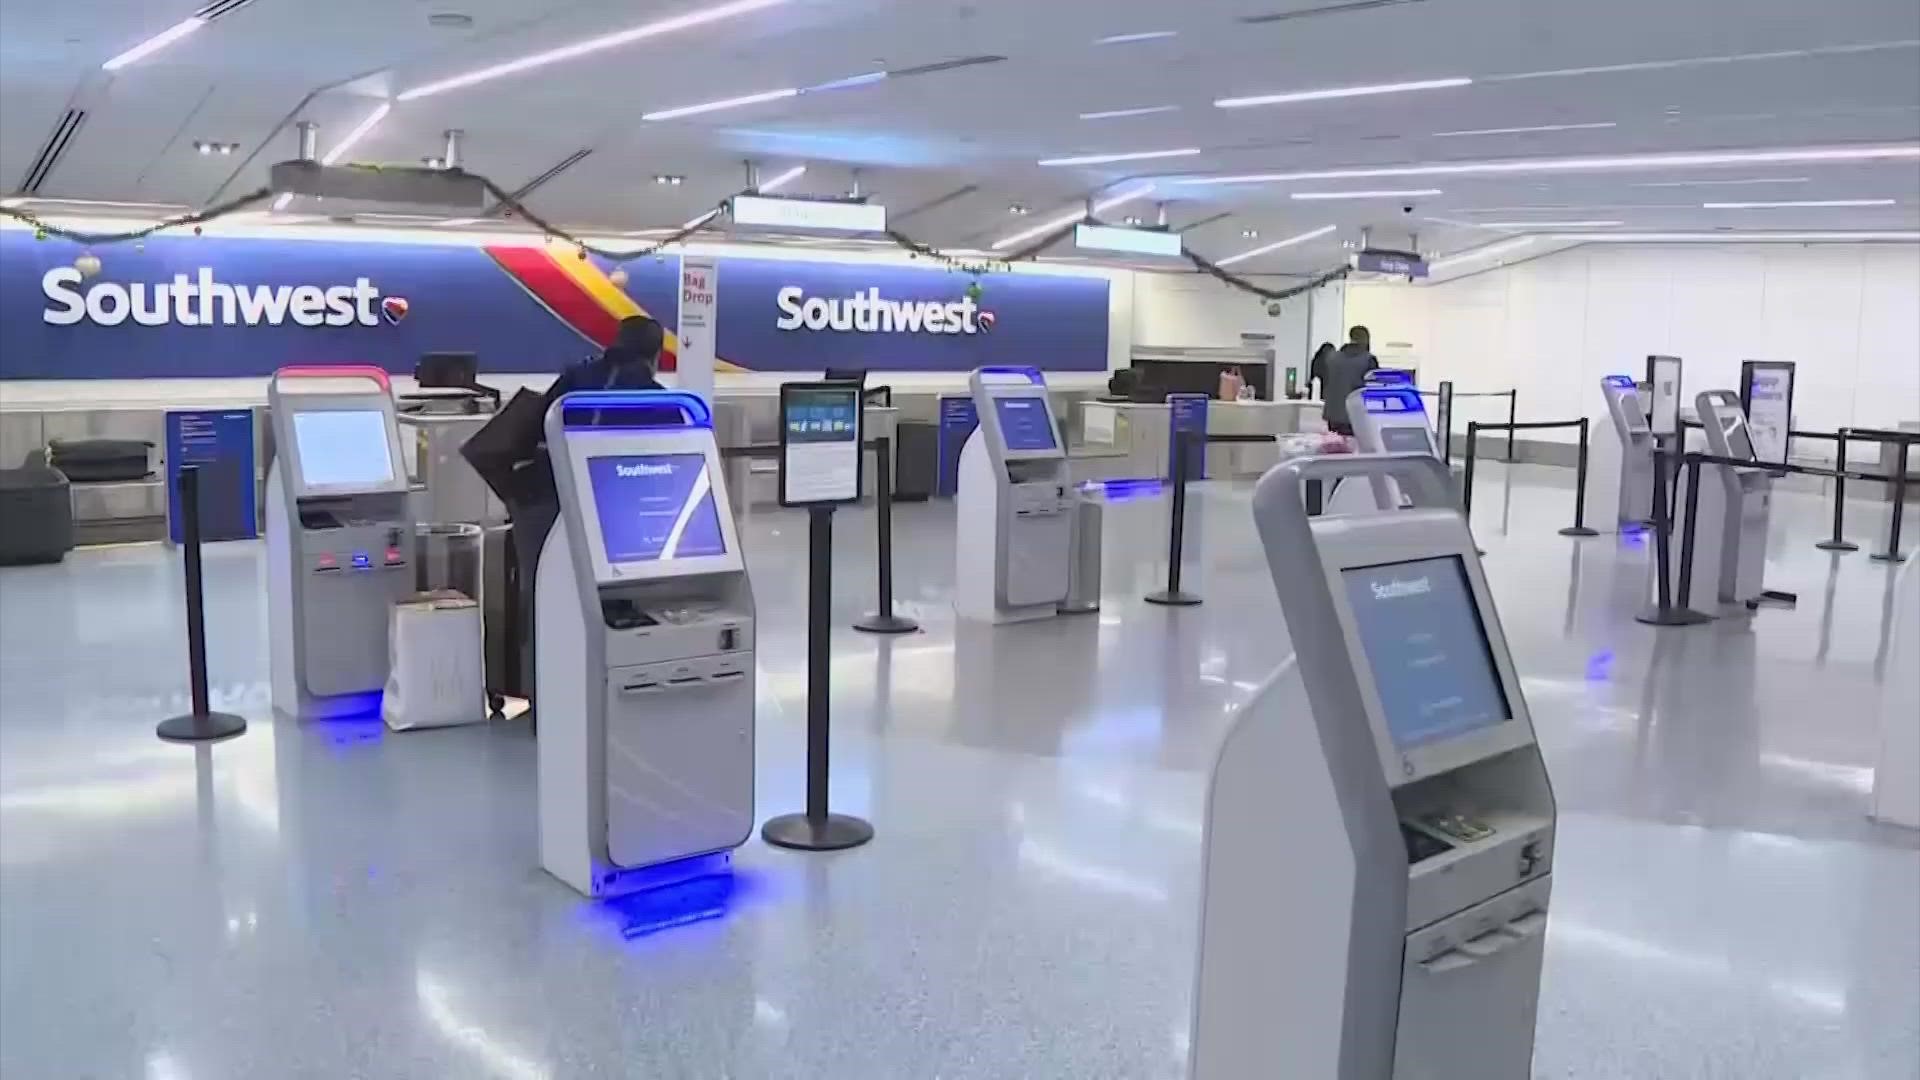 The December holiday travel failure cost Southwest $800 million in lost revenue.